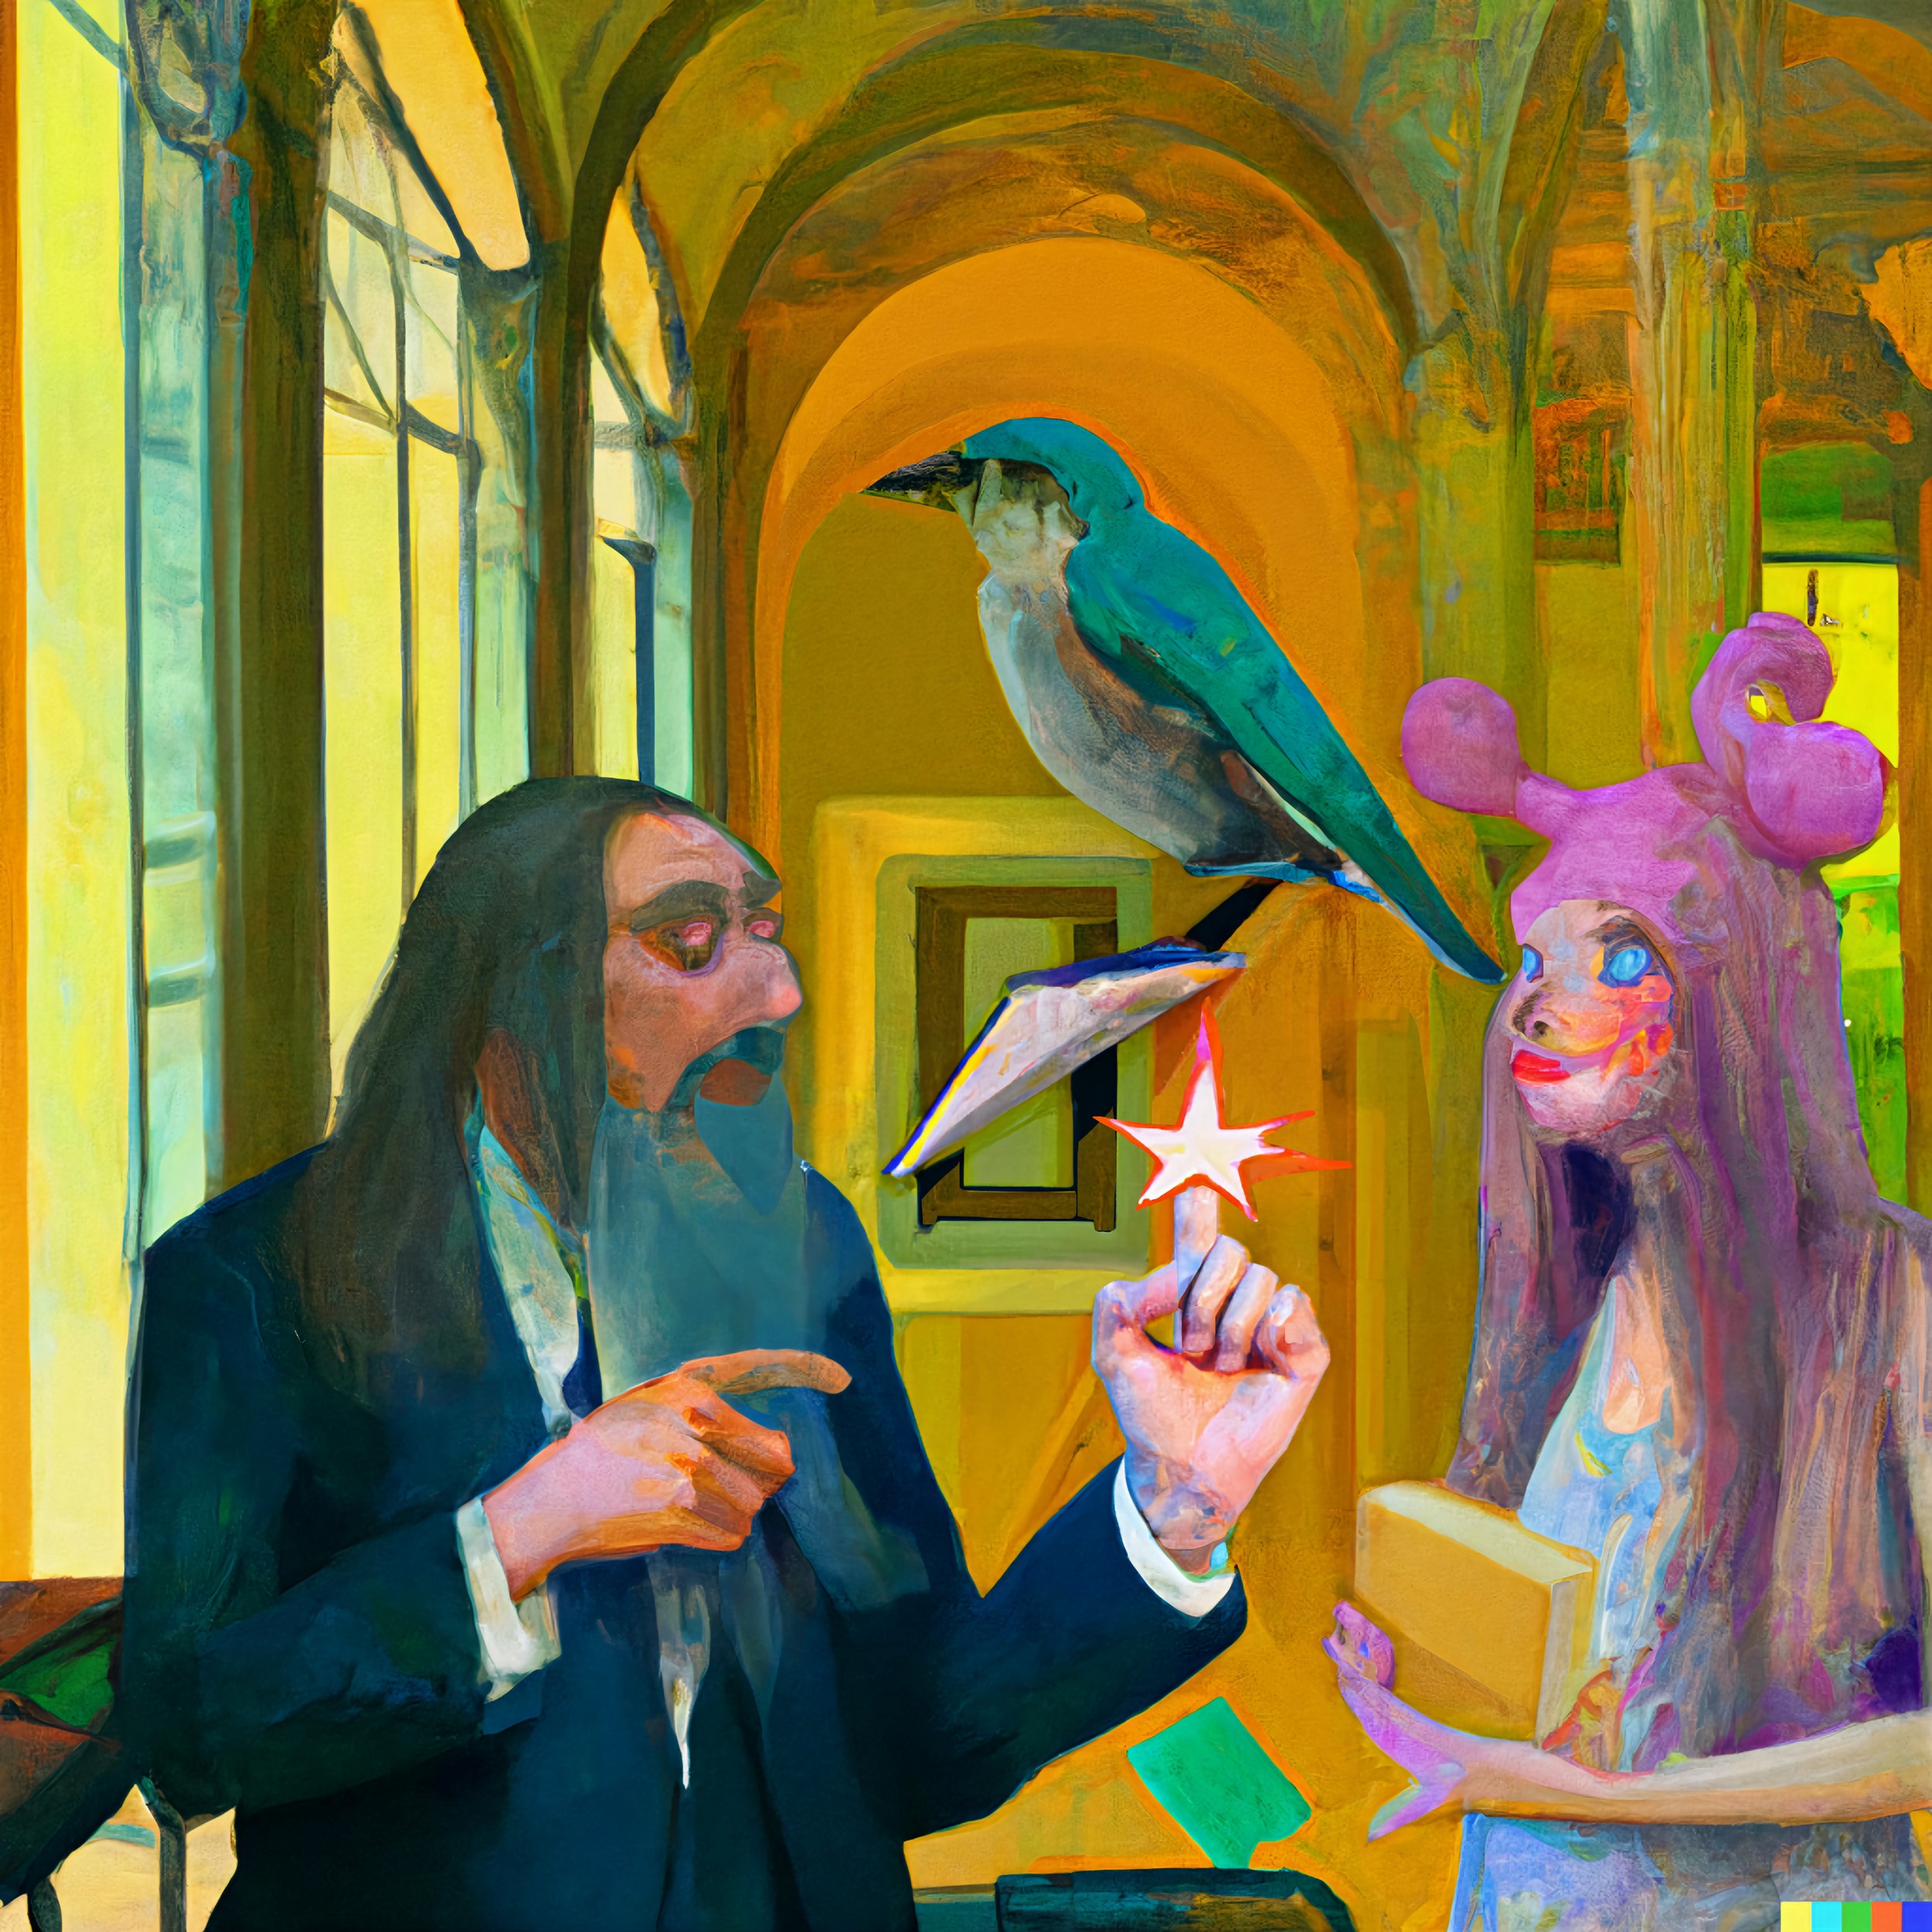 Fig. 3 Sophie Kermit having a philosophical discussion with Robert the Philosopher, post internet painting good2.jpg